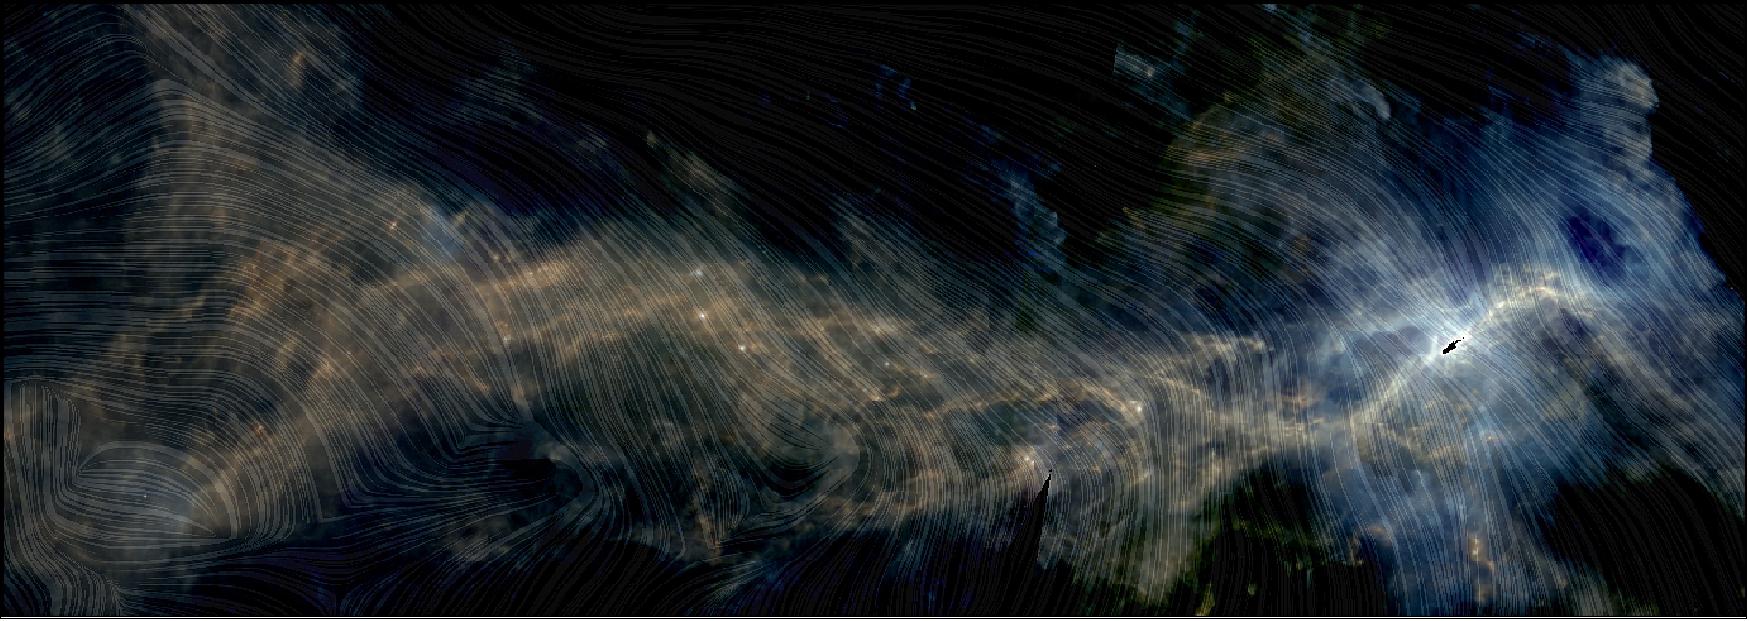 Figure 24: The data comprising this image were gathered during Planck’s all-sky observations and Herschel’s ‘Gould Belt Survey’. Operational until 2013, both Herschel and Planck were instrumental in exploring the cool and the distant Universe, shedding light on many cosmic phenomena, from the formation of stars in our Milky Way galaxy to the expansion history of the entire Universe [image credit: ESA/Herschel/Planck J. D. Soler, Max Planck Institute for Astronomy (Heidelberg, Germany)]